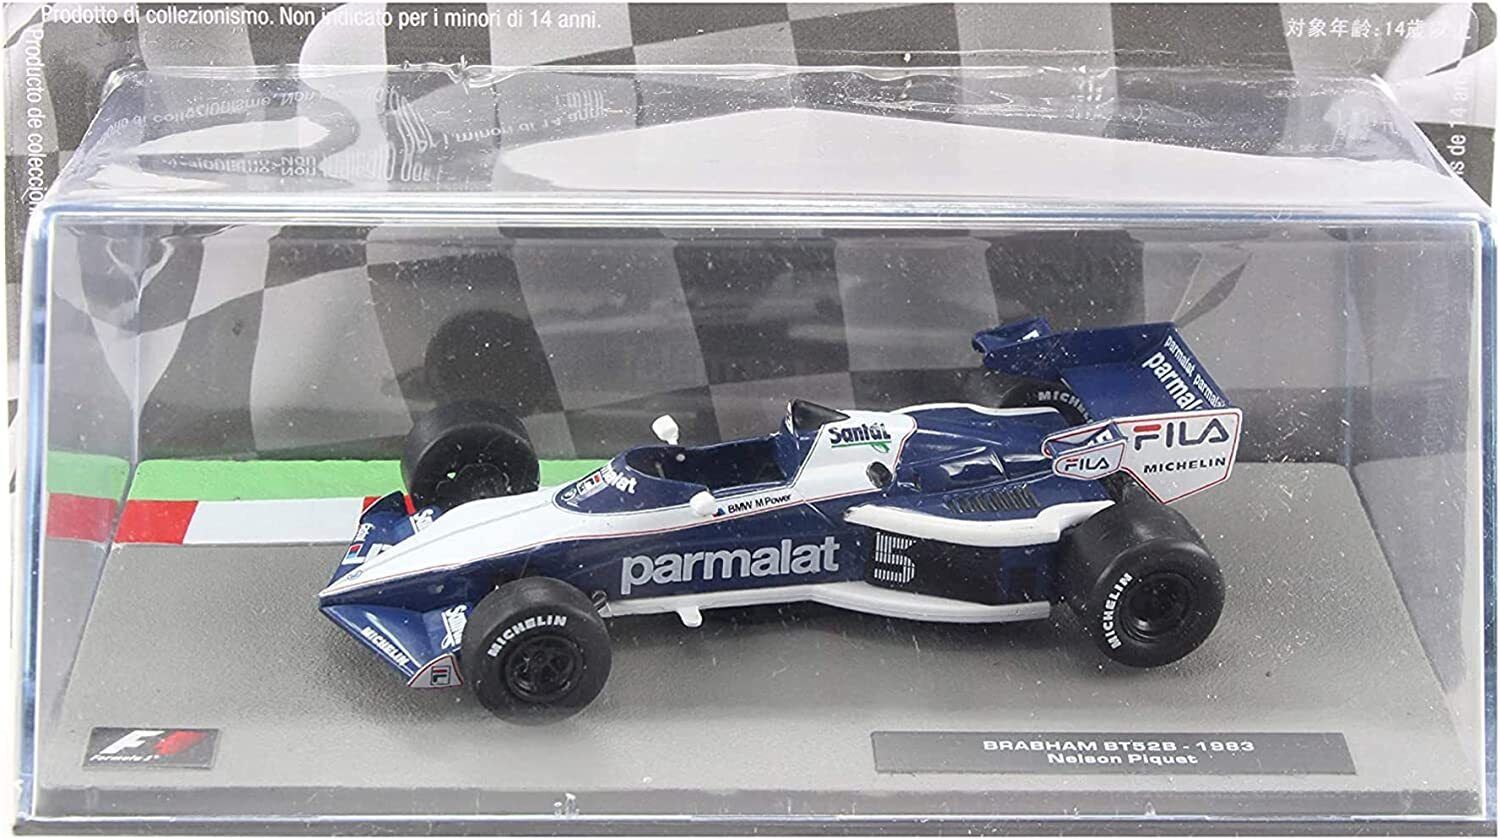 Deagostini Diecast 1:43 F1 Scale 2 Pack - Nelson Piquet and Gilles